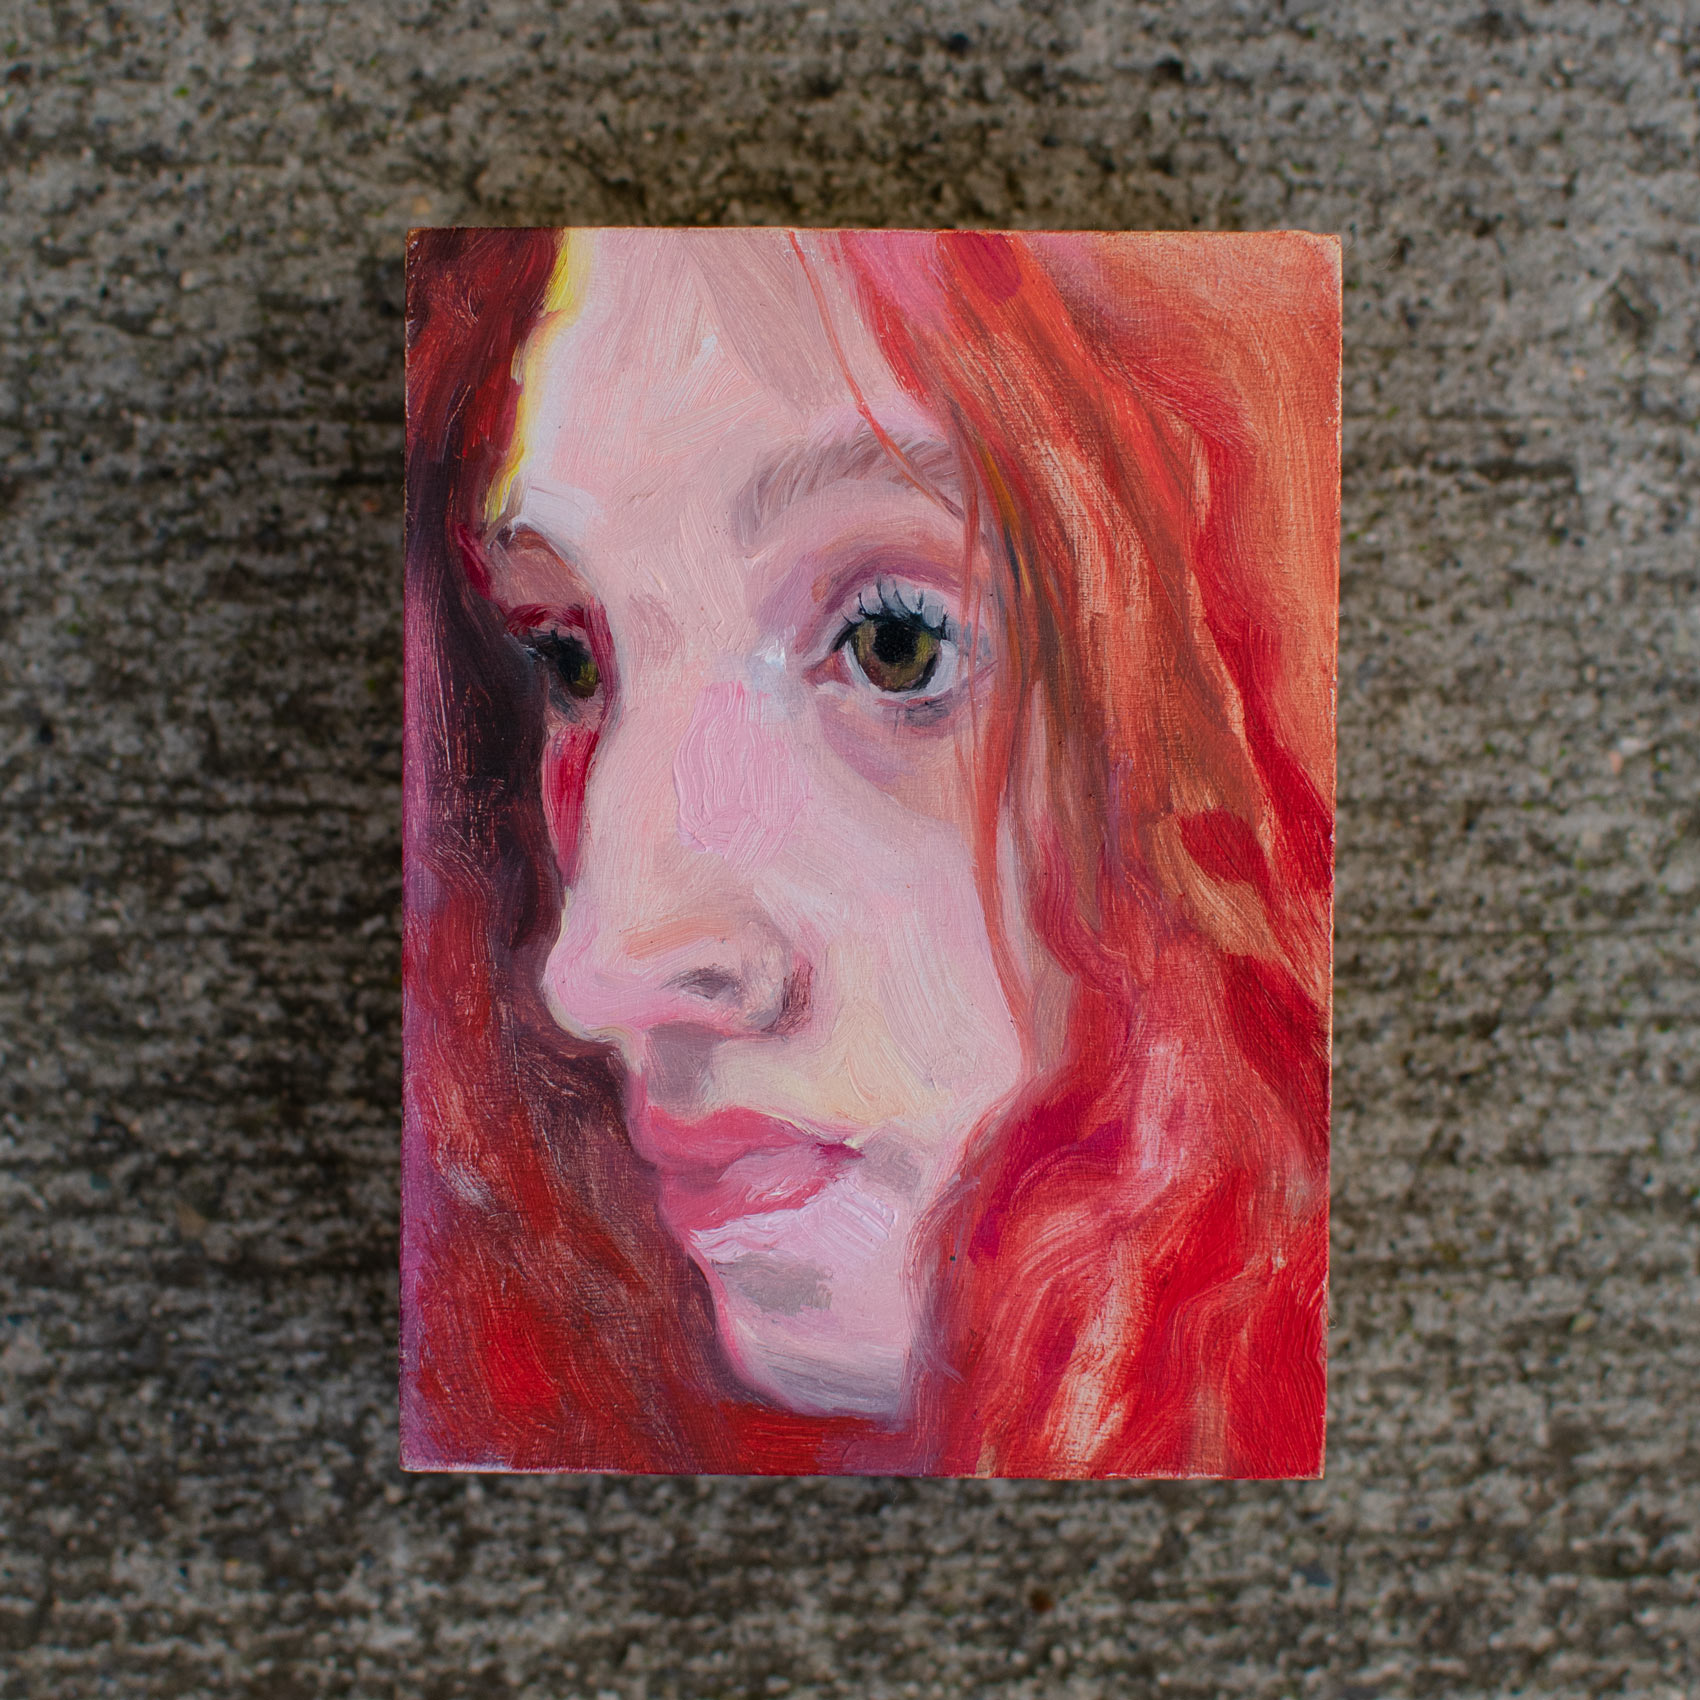 expresssive closeup portrait of a person with long red hair